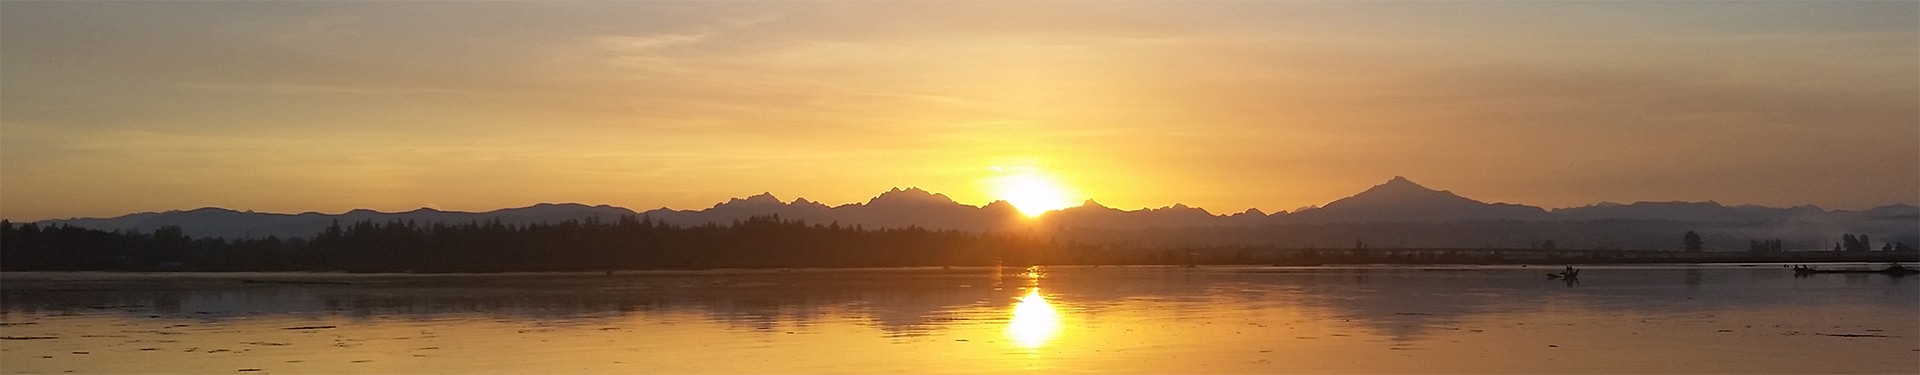 Tulalip Natural Resources Department image of sunrise on the Salish Sea